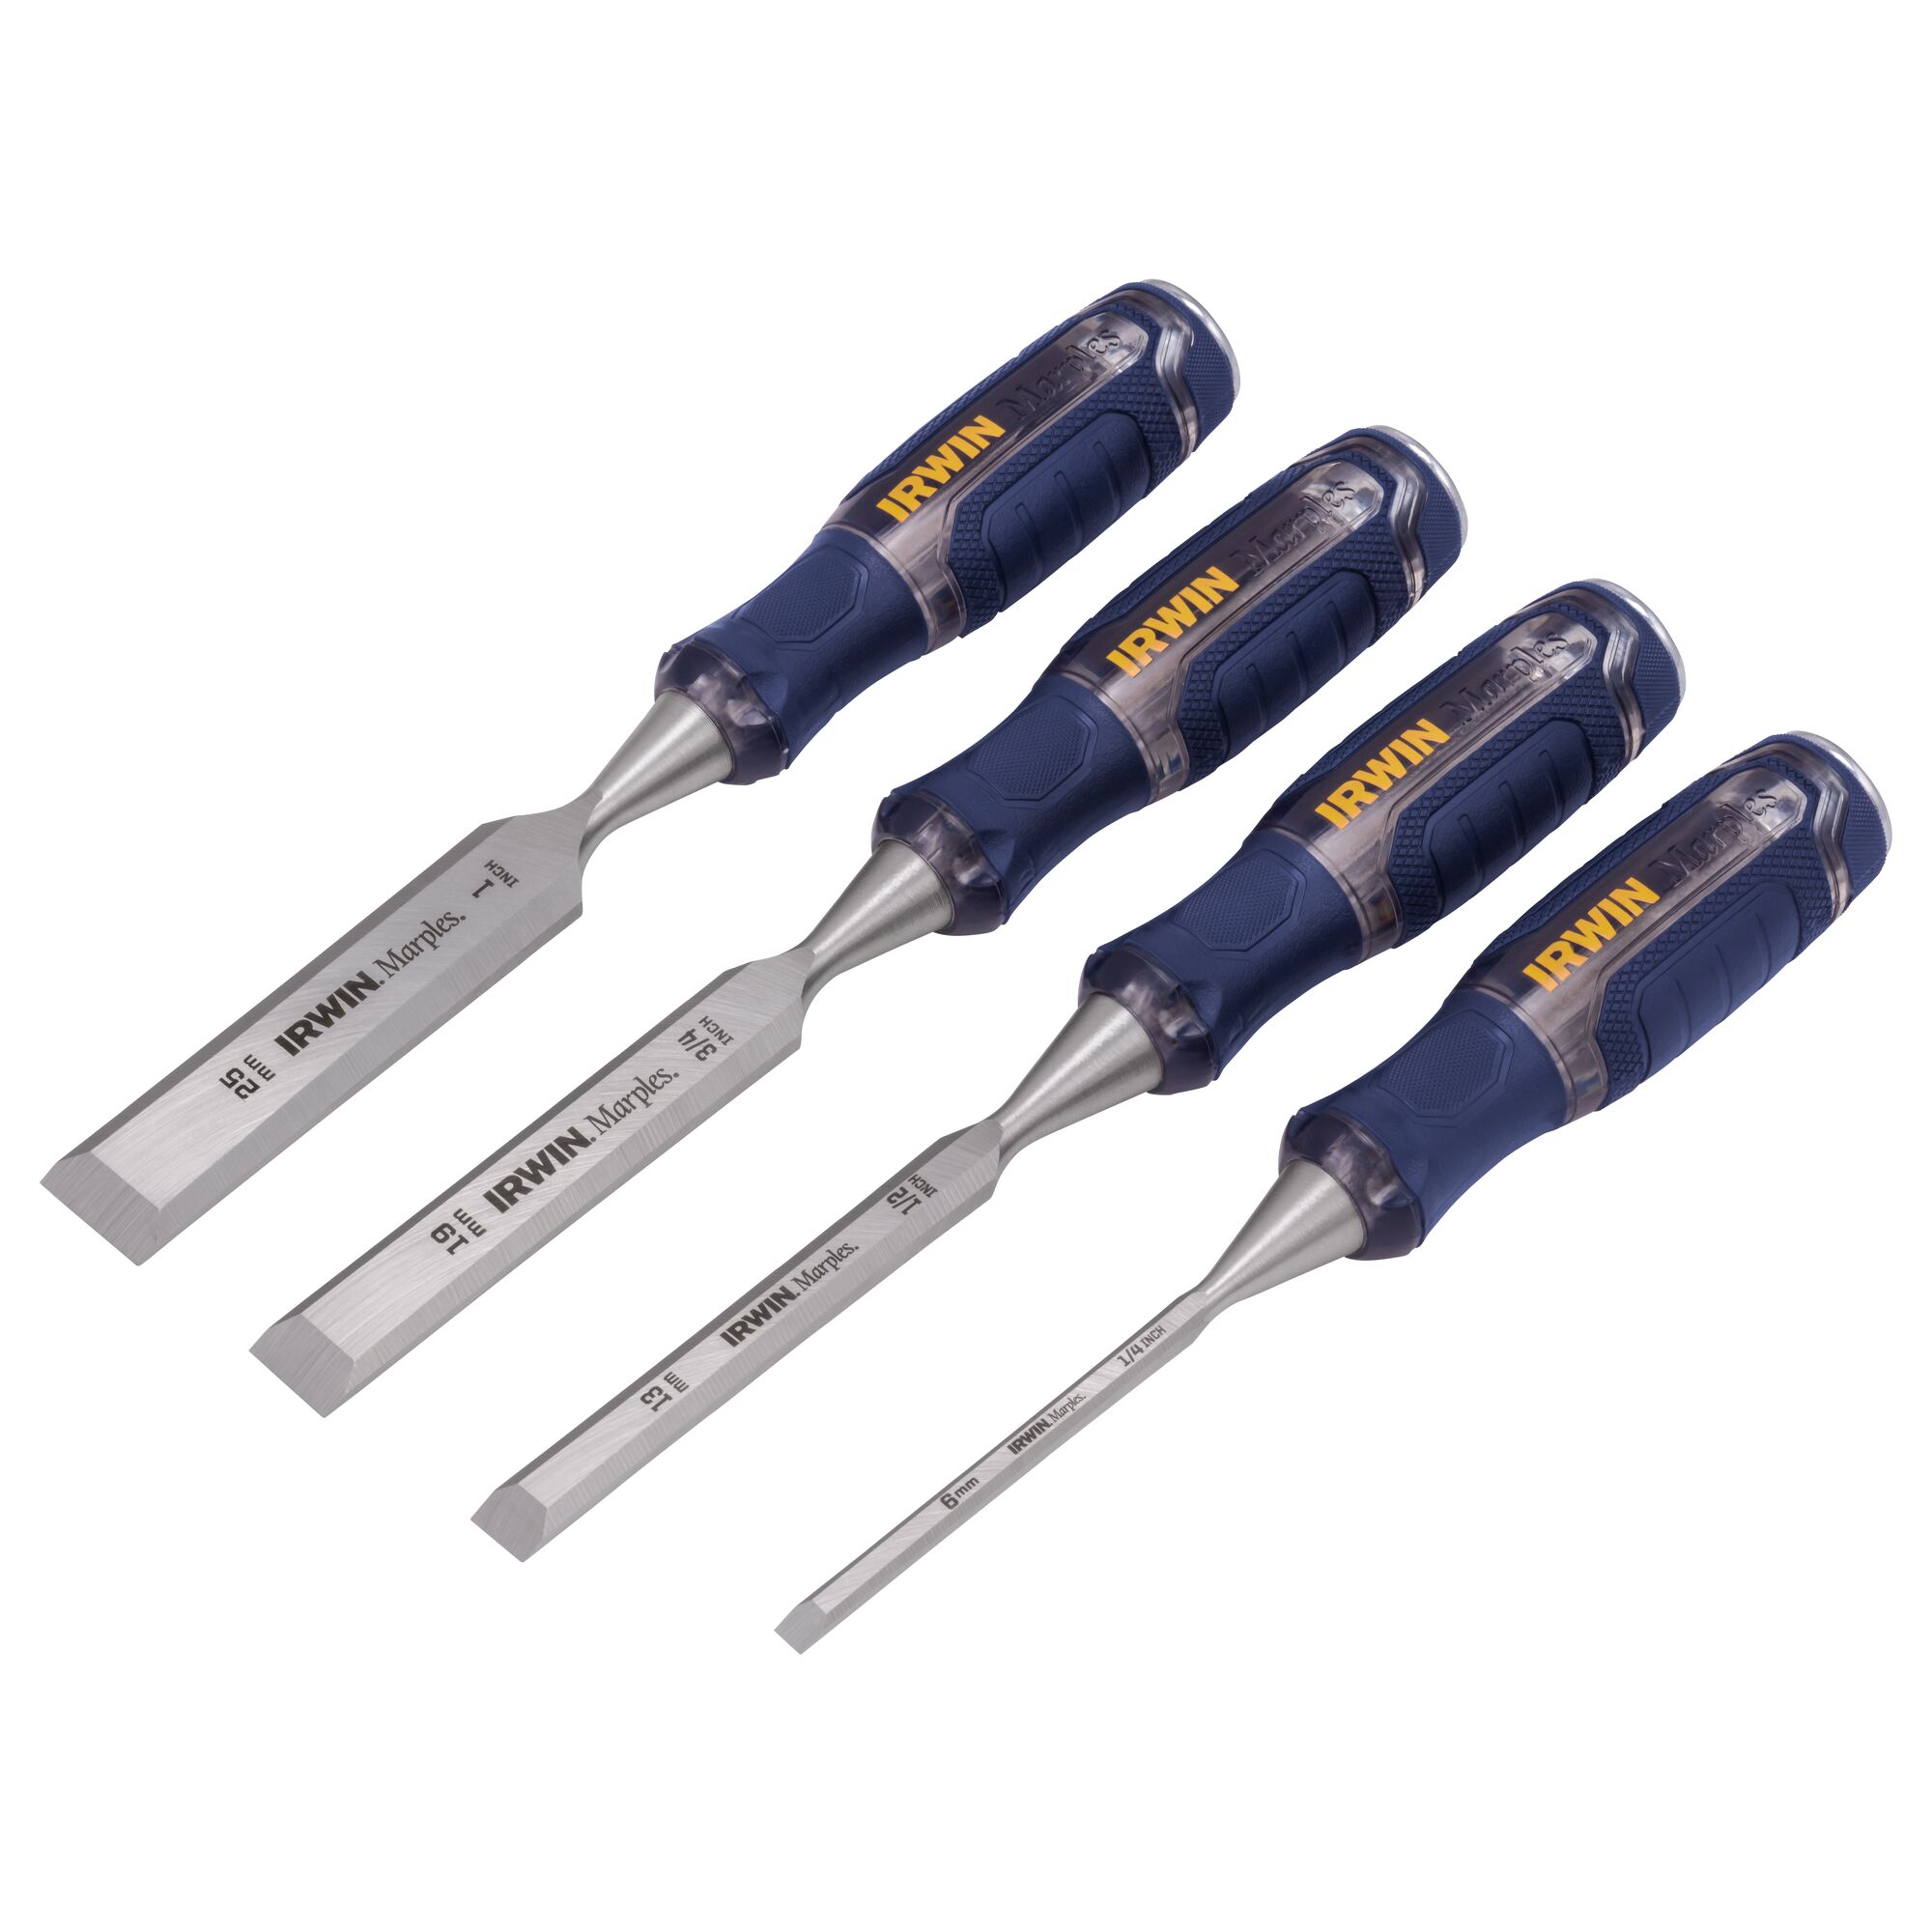 7 in. Long Air Chisel Set, 3 Piece